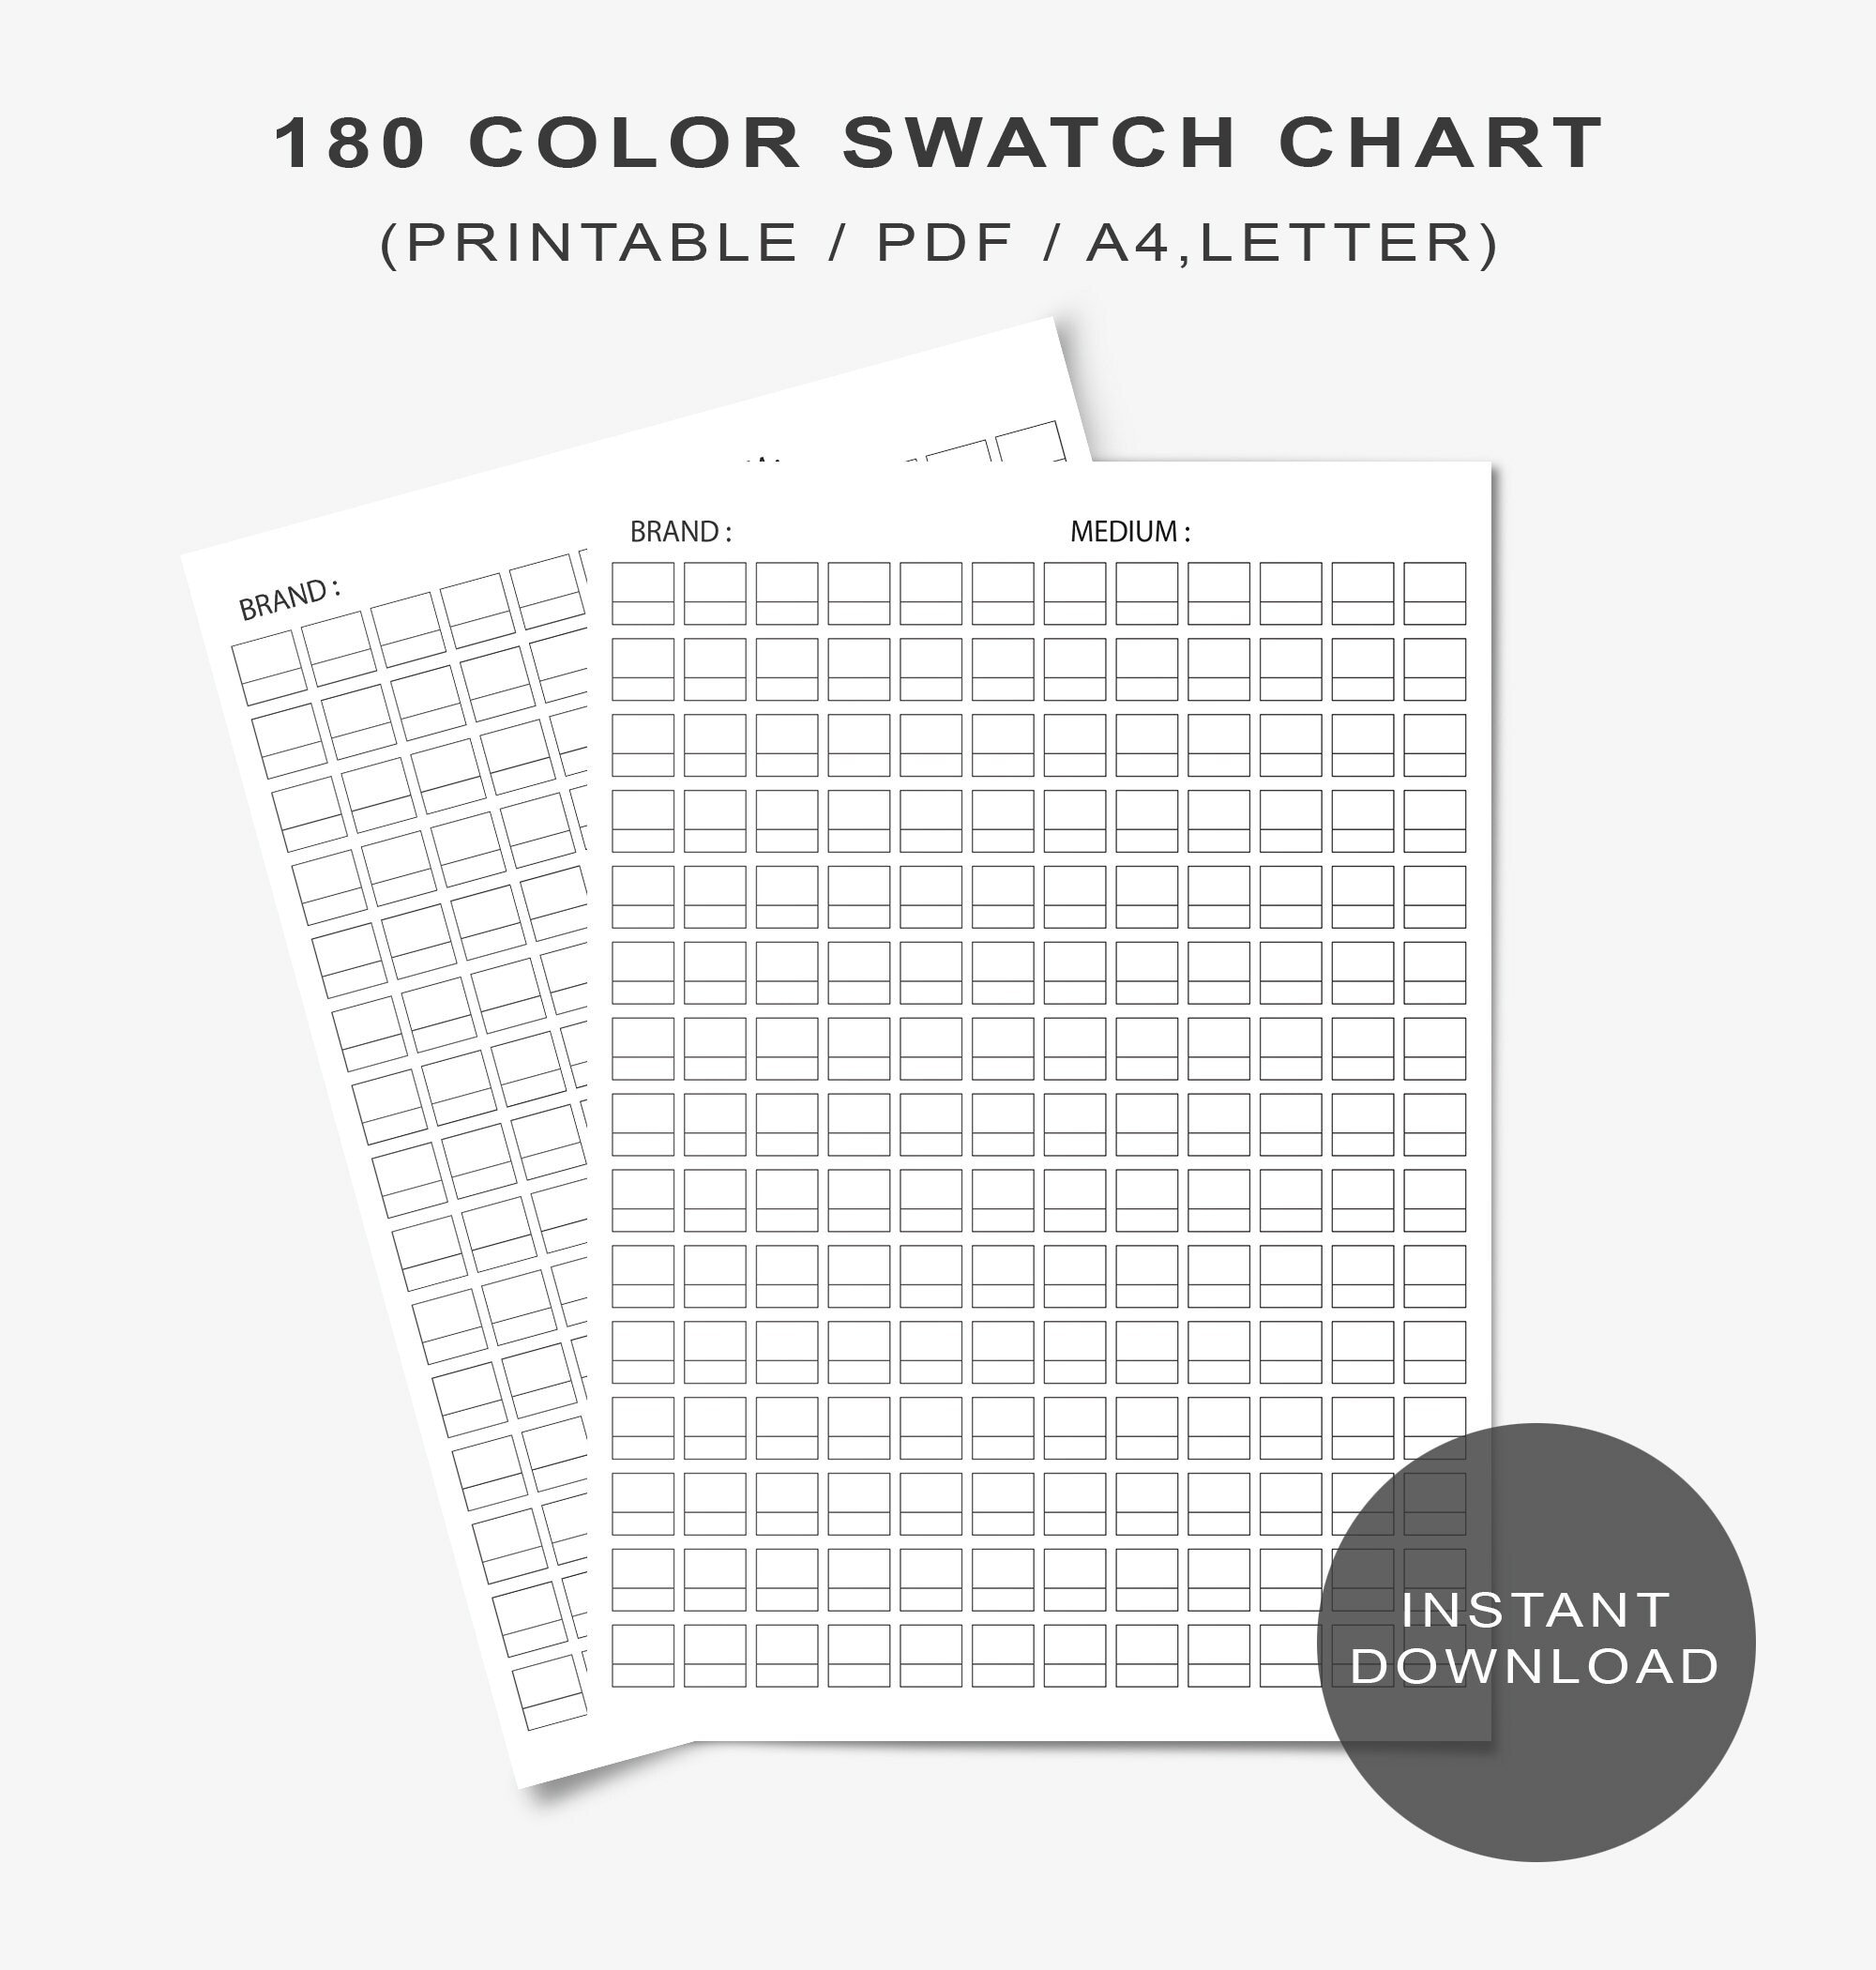 Swatch Sheet for Uni-Posca Colored Pencils - B&W Instant Download file